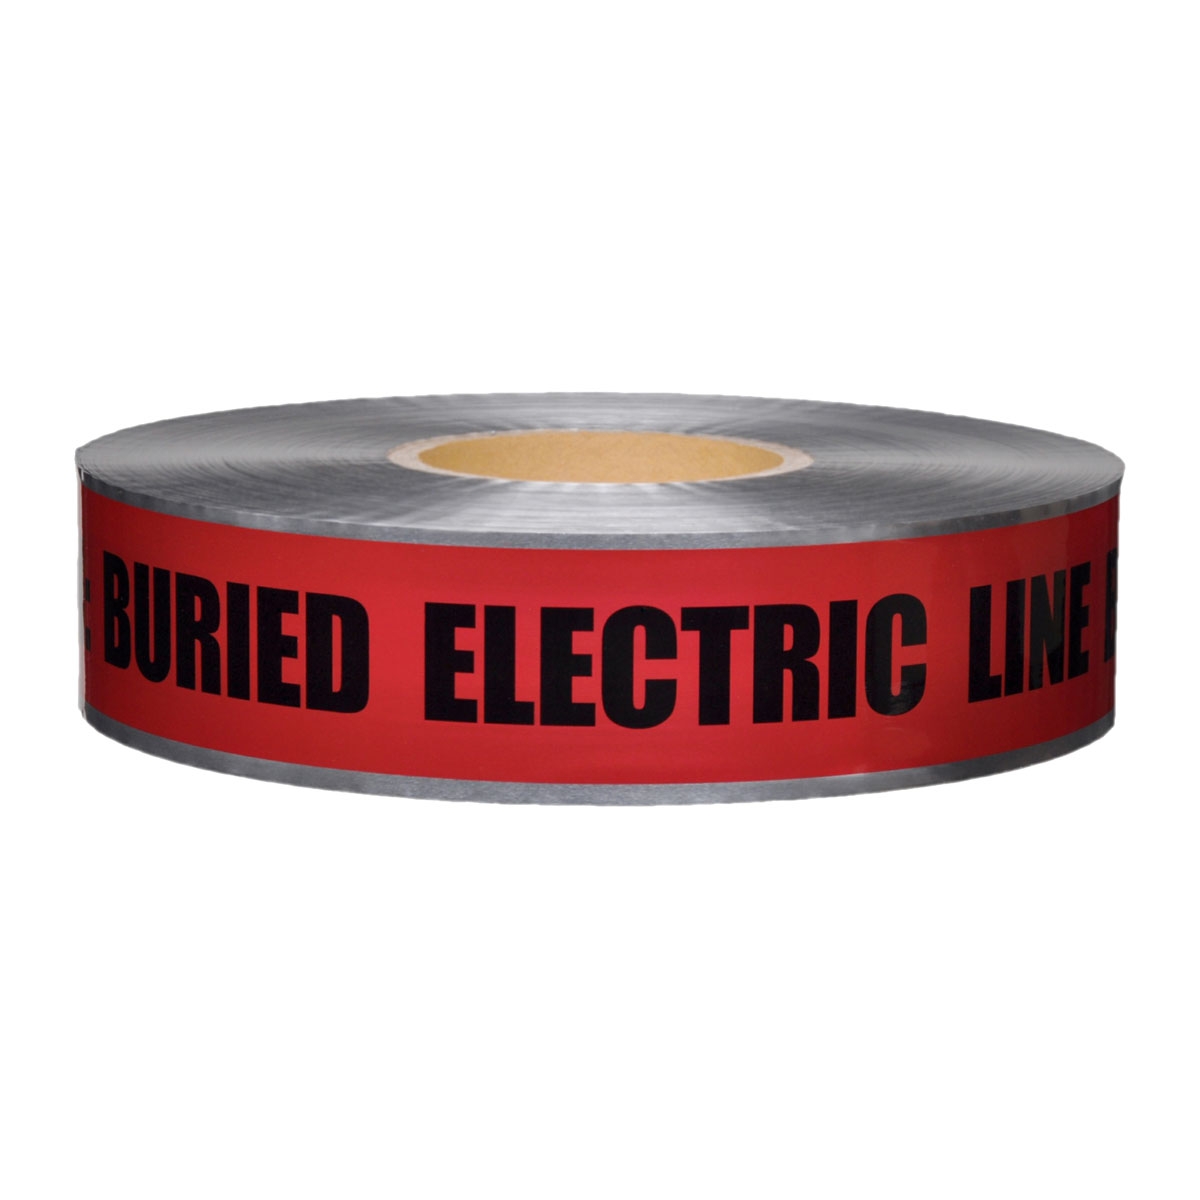 CAUTION BURIED ELECTRIC LINE BELOW - Detectable Underground Warning Tape